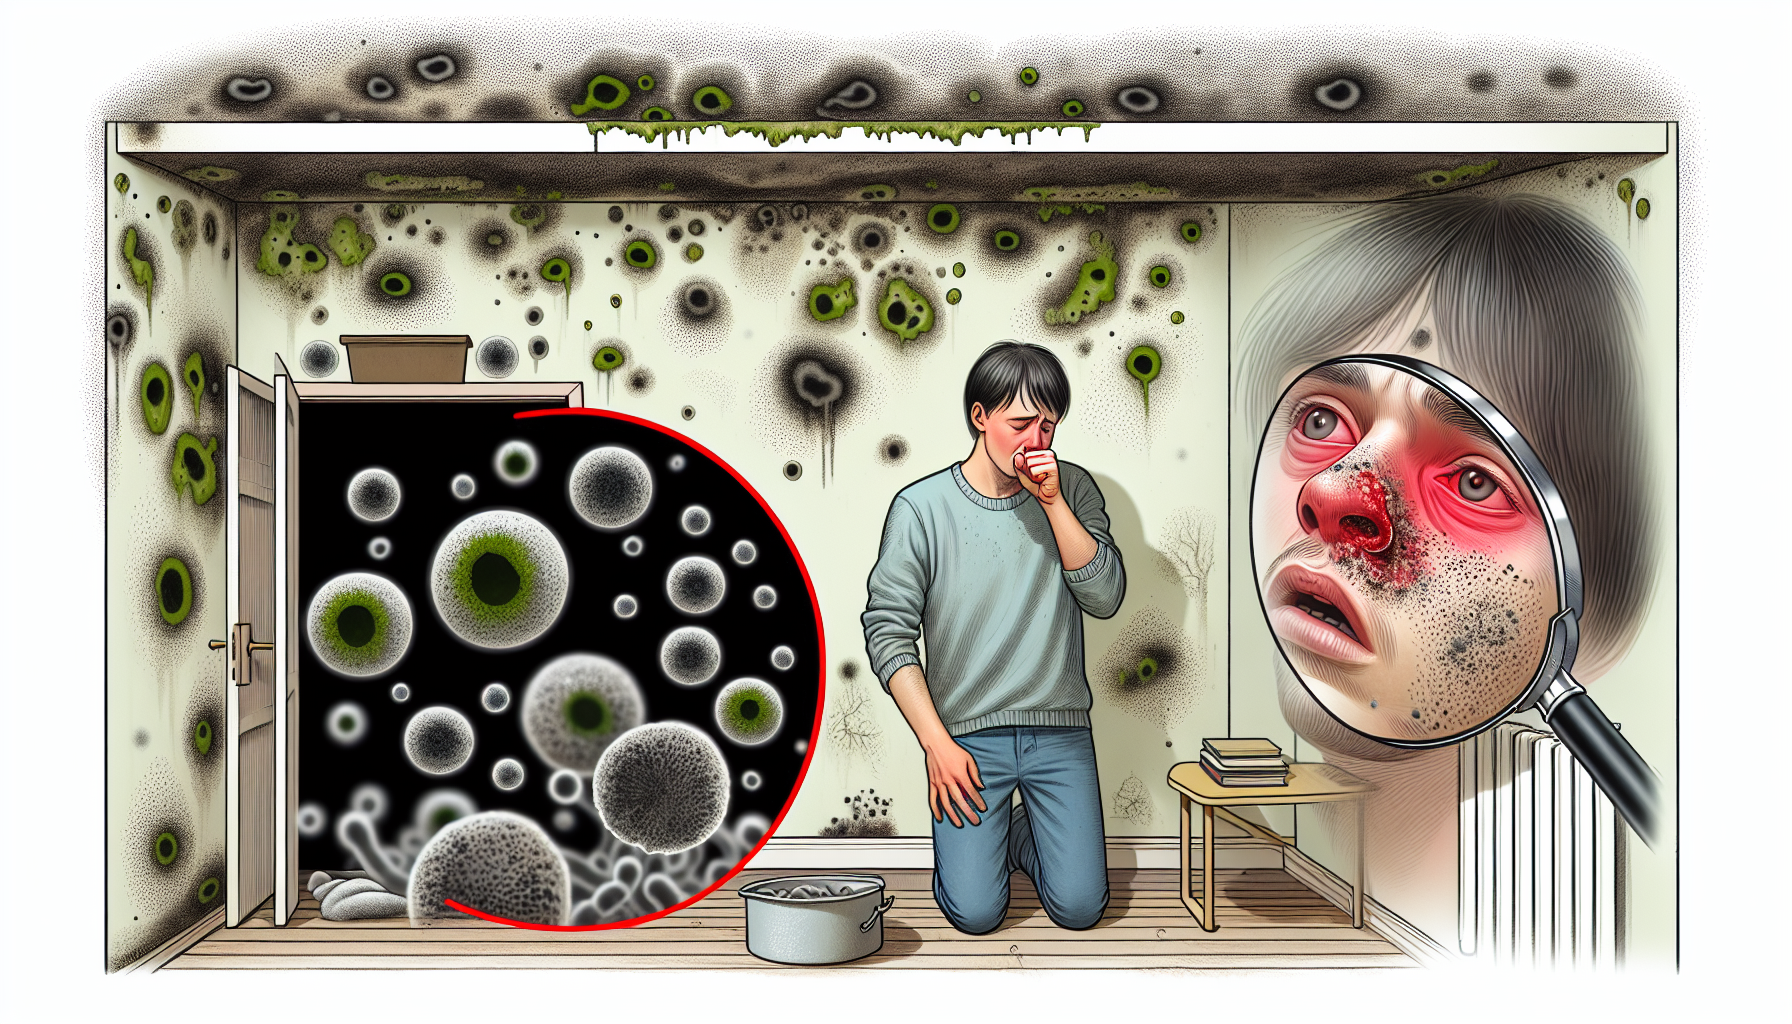 Health impacts of mold exposure